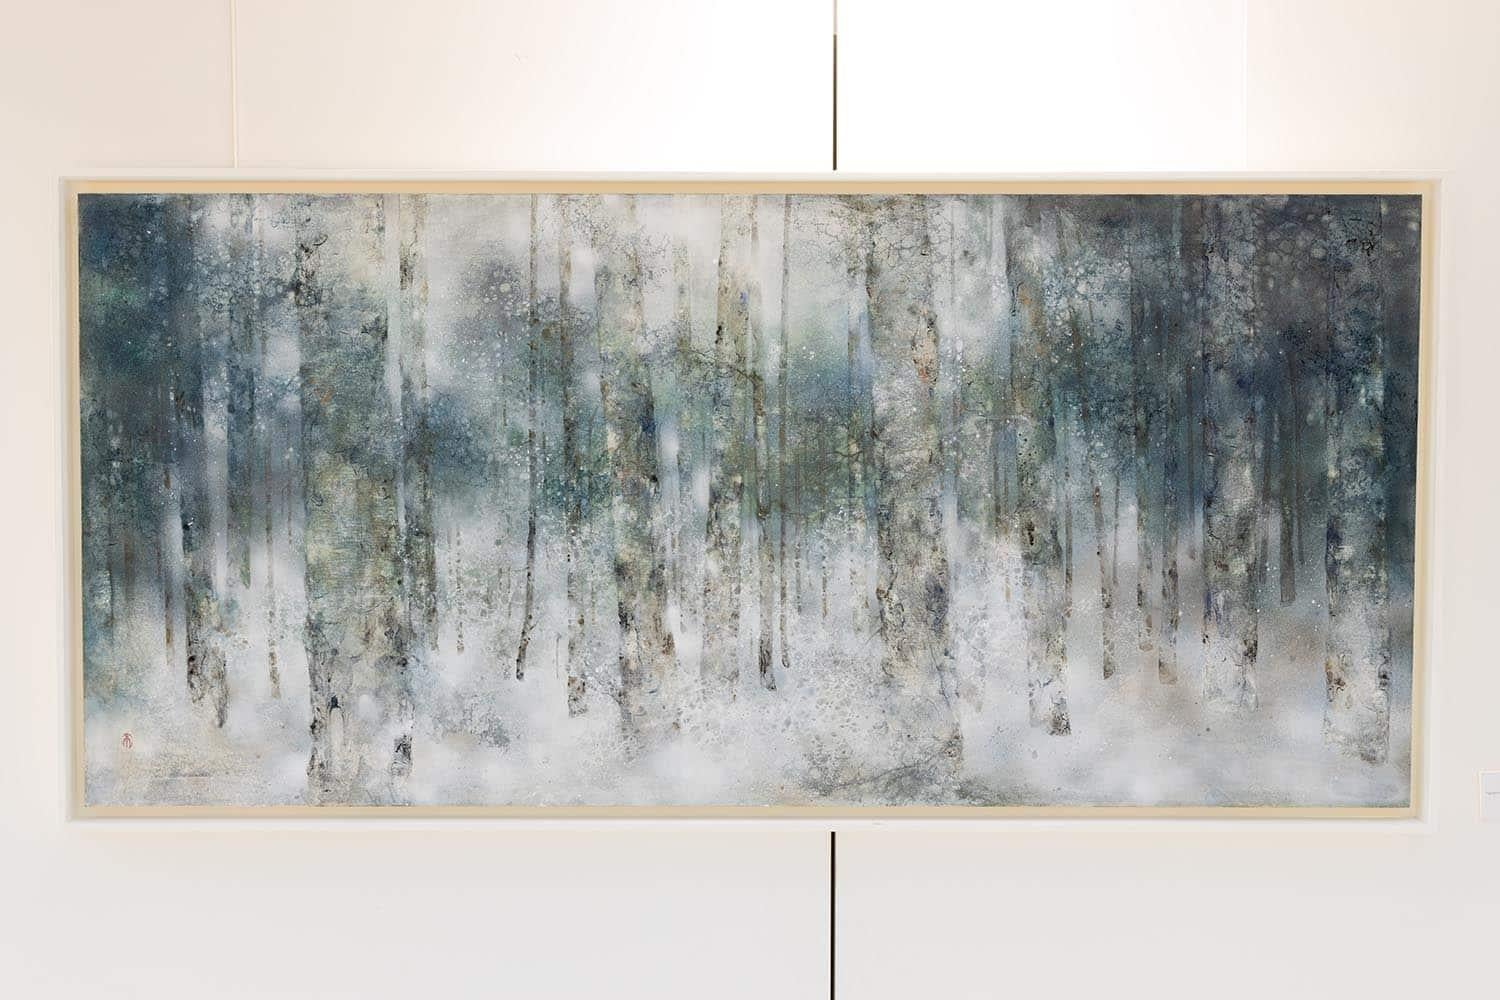 Plenitude II by CHEN Yiching - Nihonga landscape painting, forest - Contemporary Painting by Yiching Chen